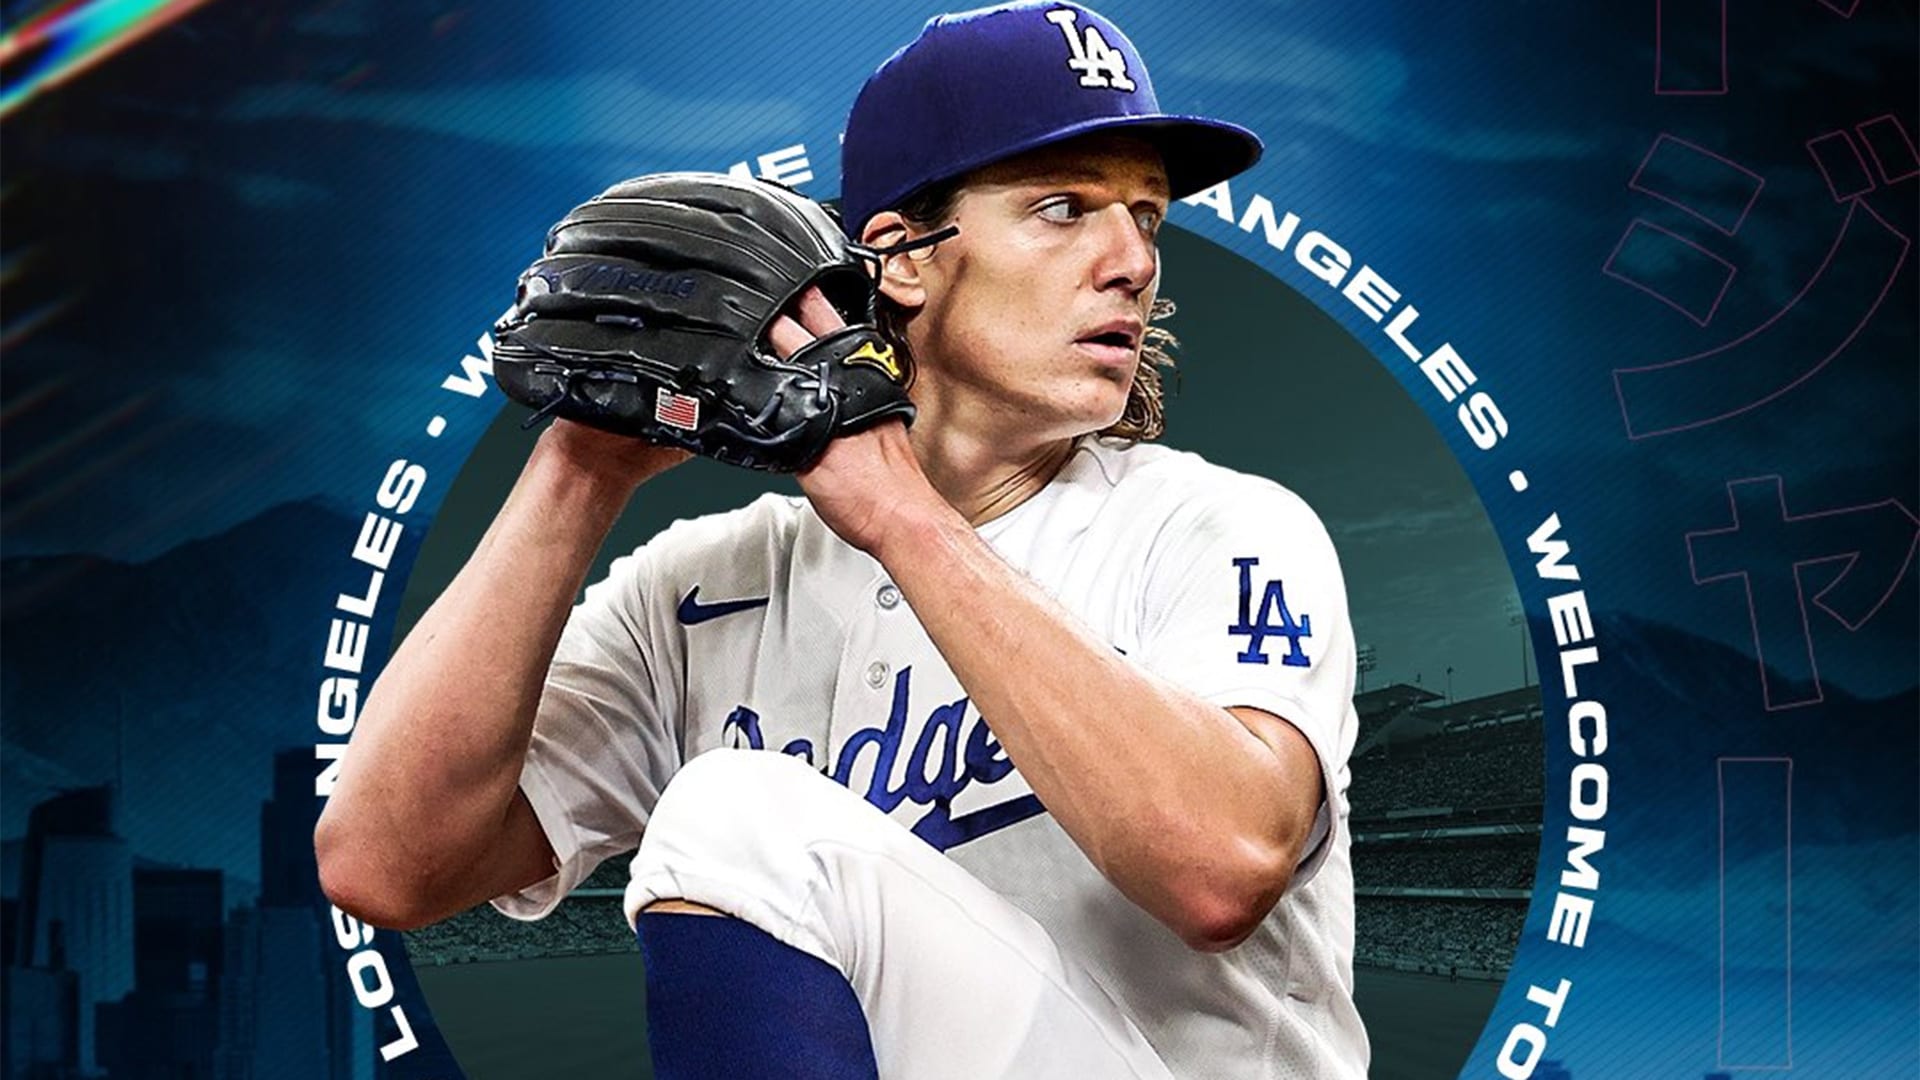 A photo illustration of Tyler Glasnow pitching in a Dodgers uniform